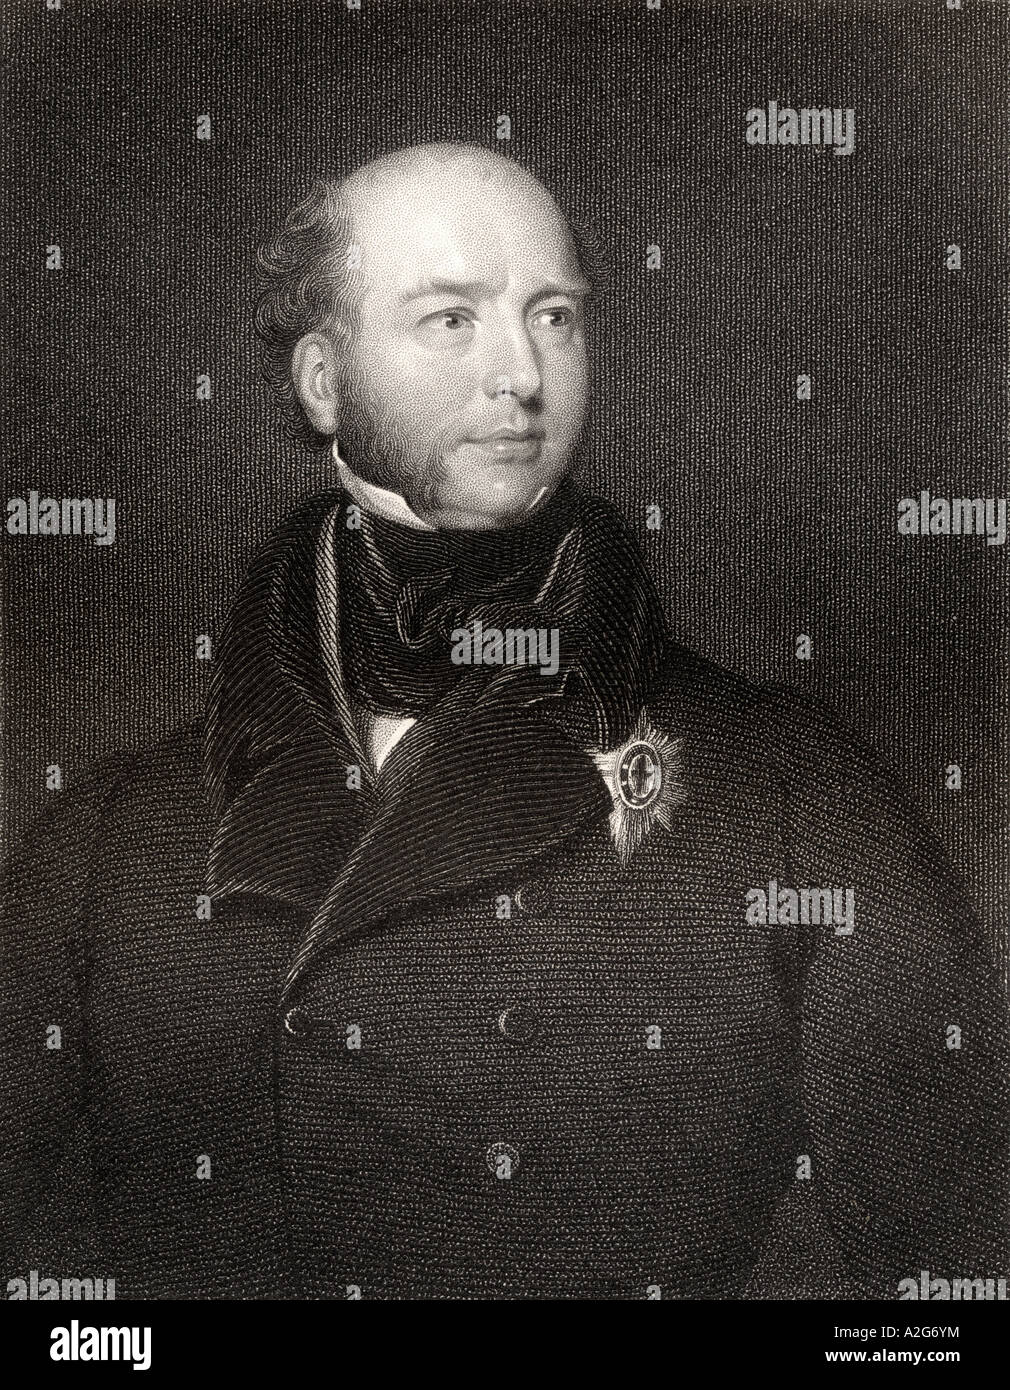 Francis Charles Seymour Conway, 3rd Marquess of Hertford, 1777 - 1842. British Tory politician and art collector. Stock Photo